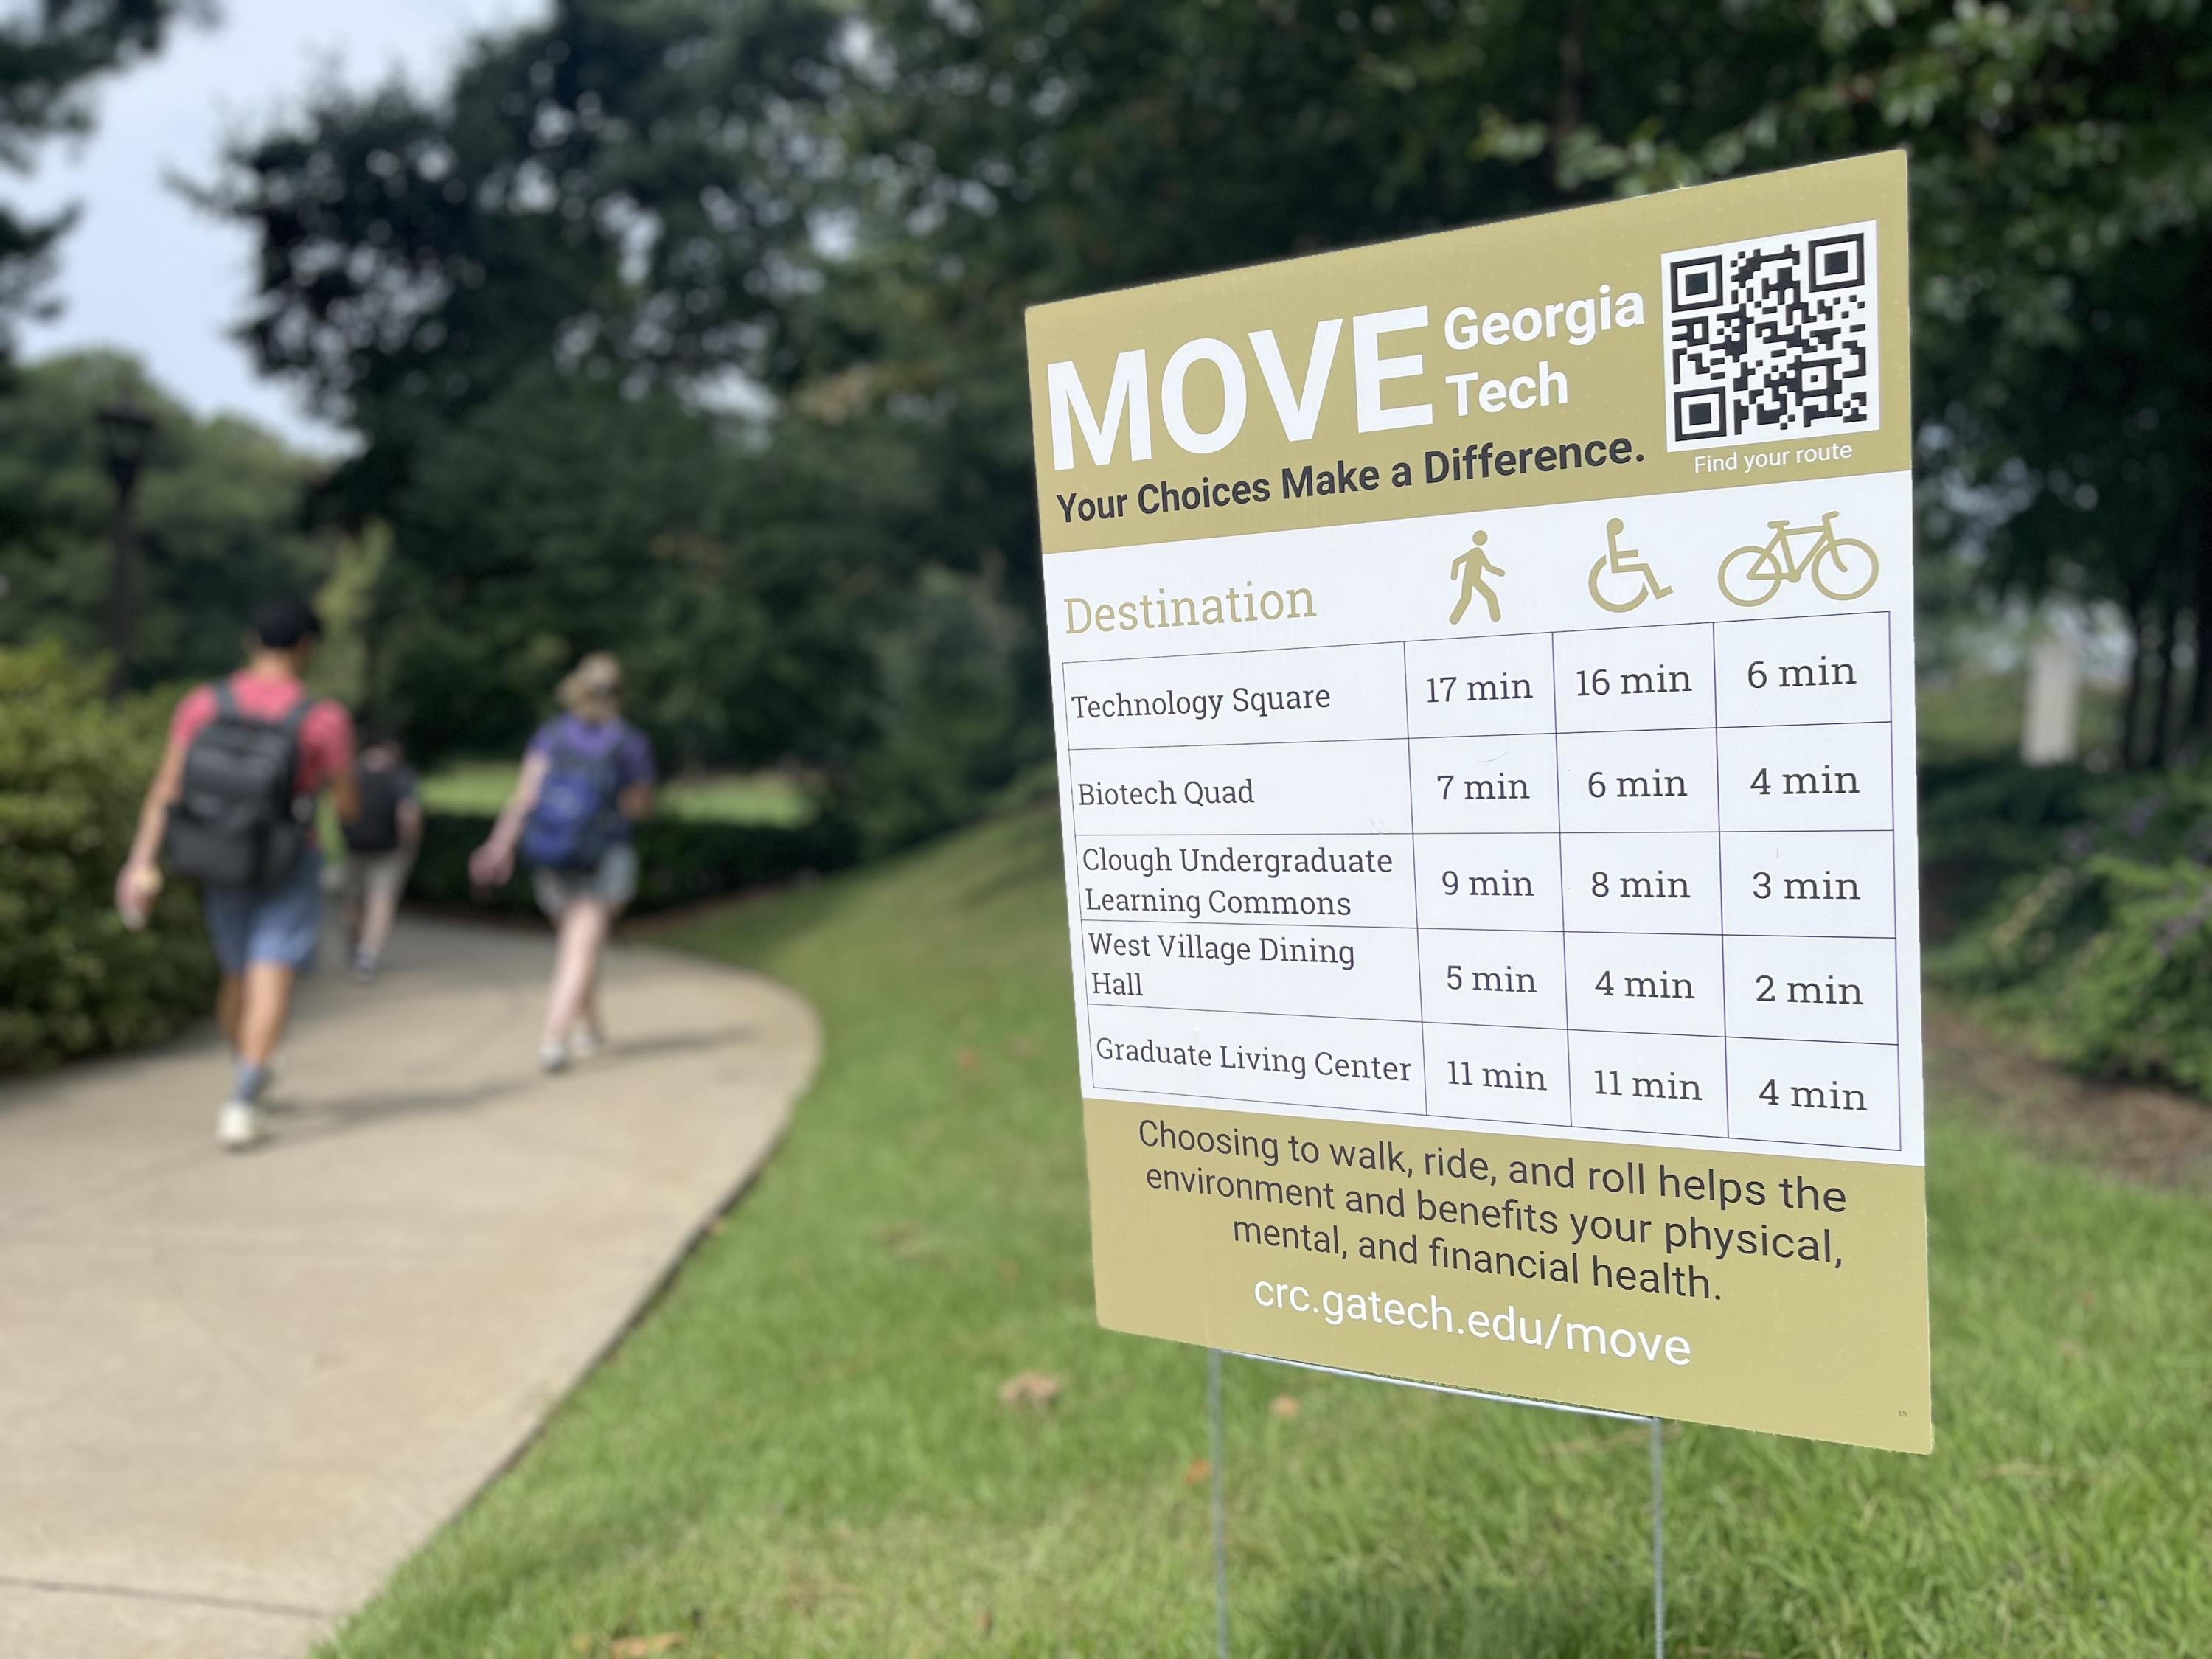 Move Georgia Tech hopes to empower the campus community to choose active transportation.